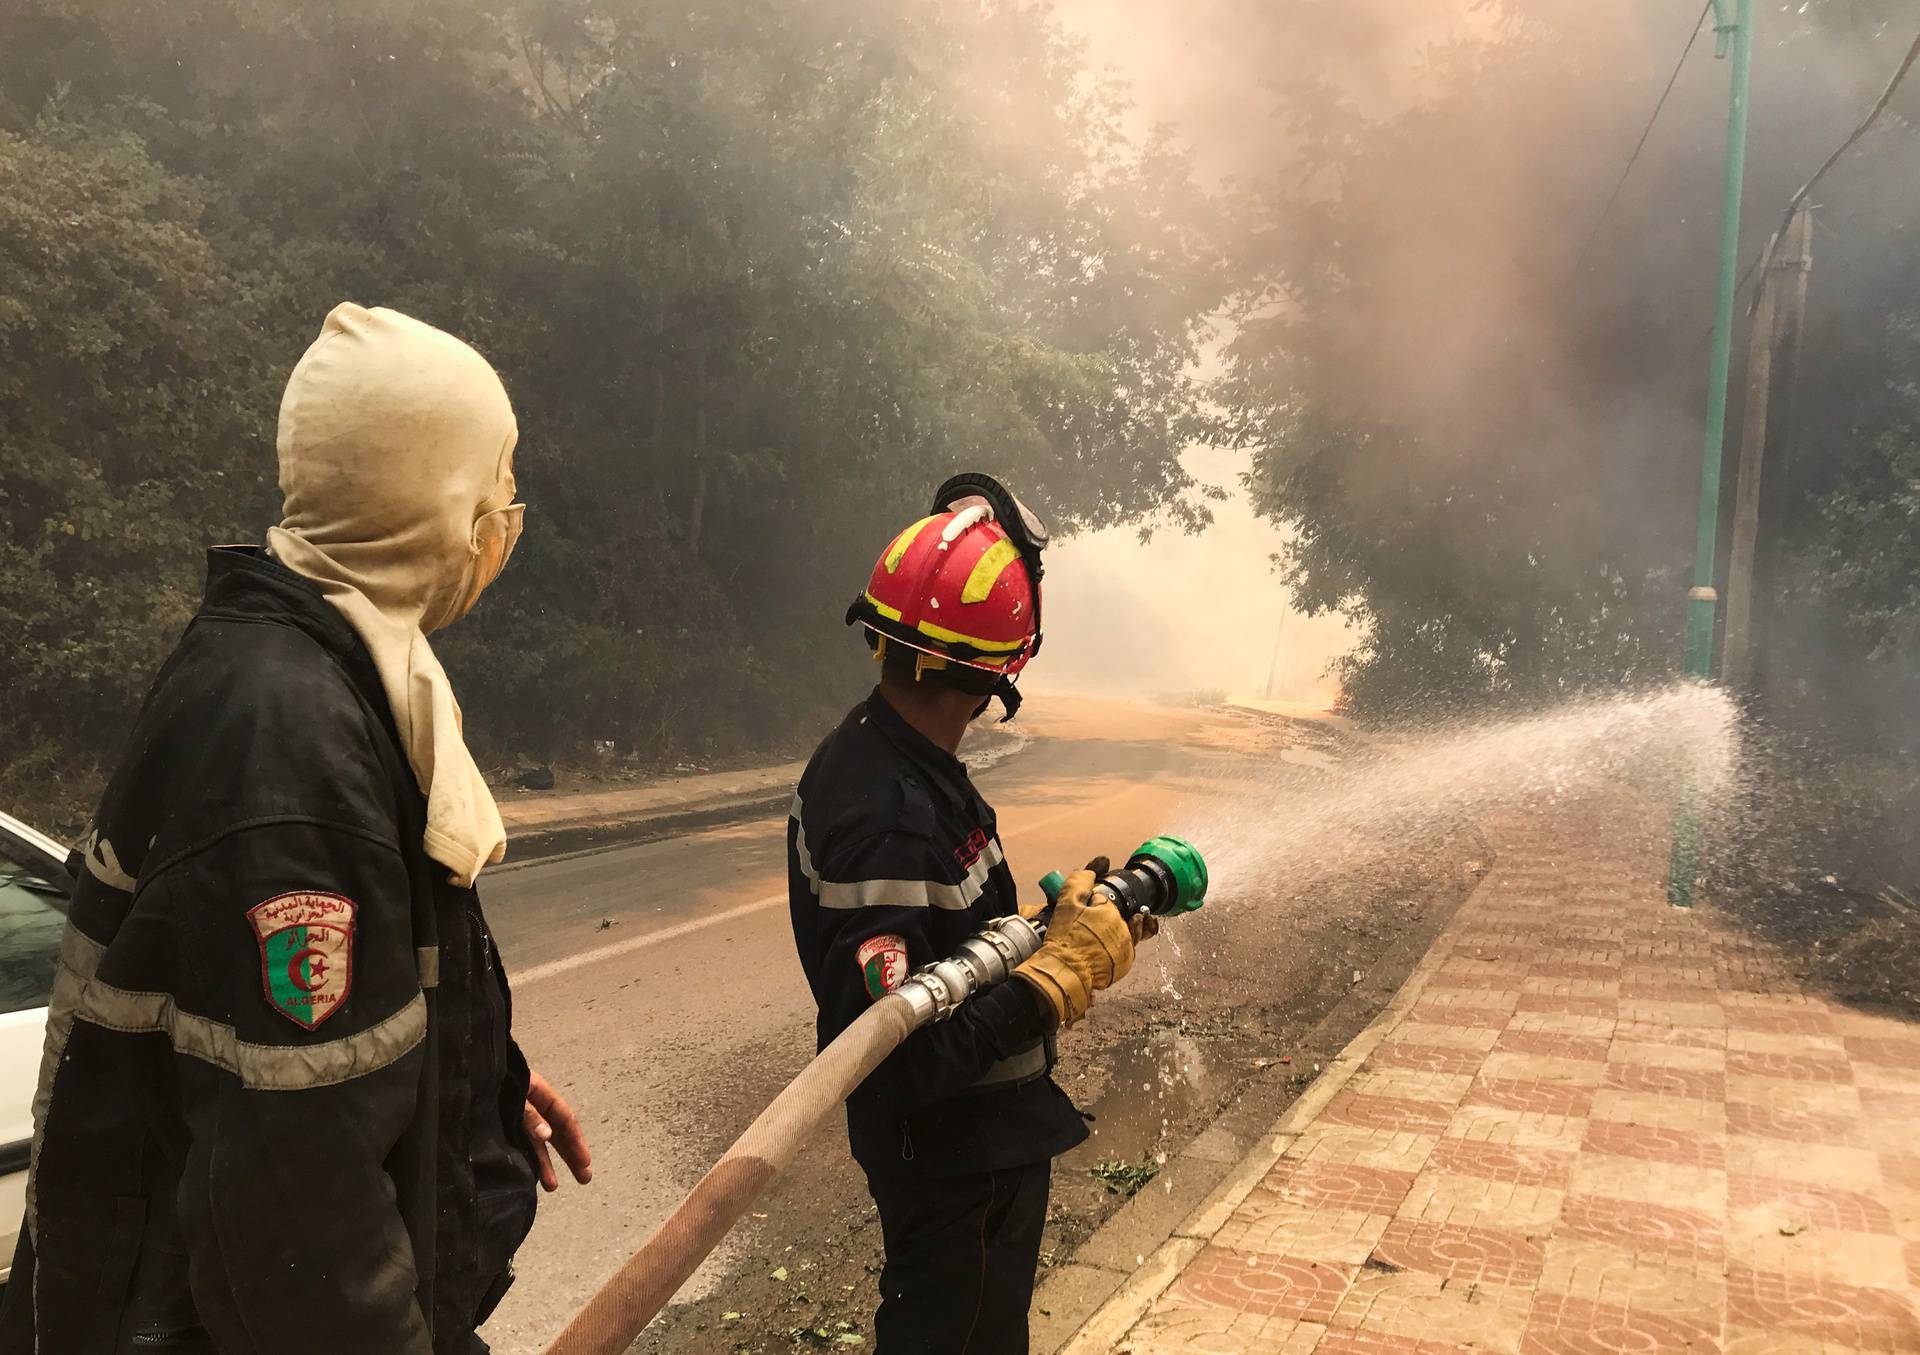 A firefighter uses a water hose during a forest fire in Ain al-Hammam village